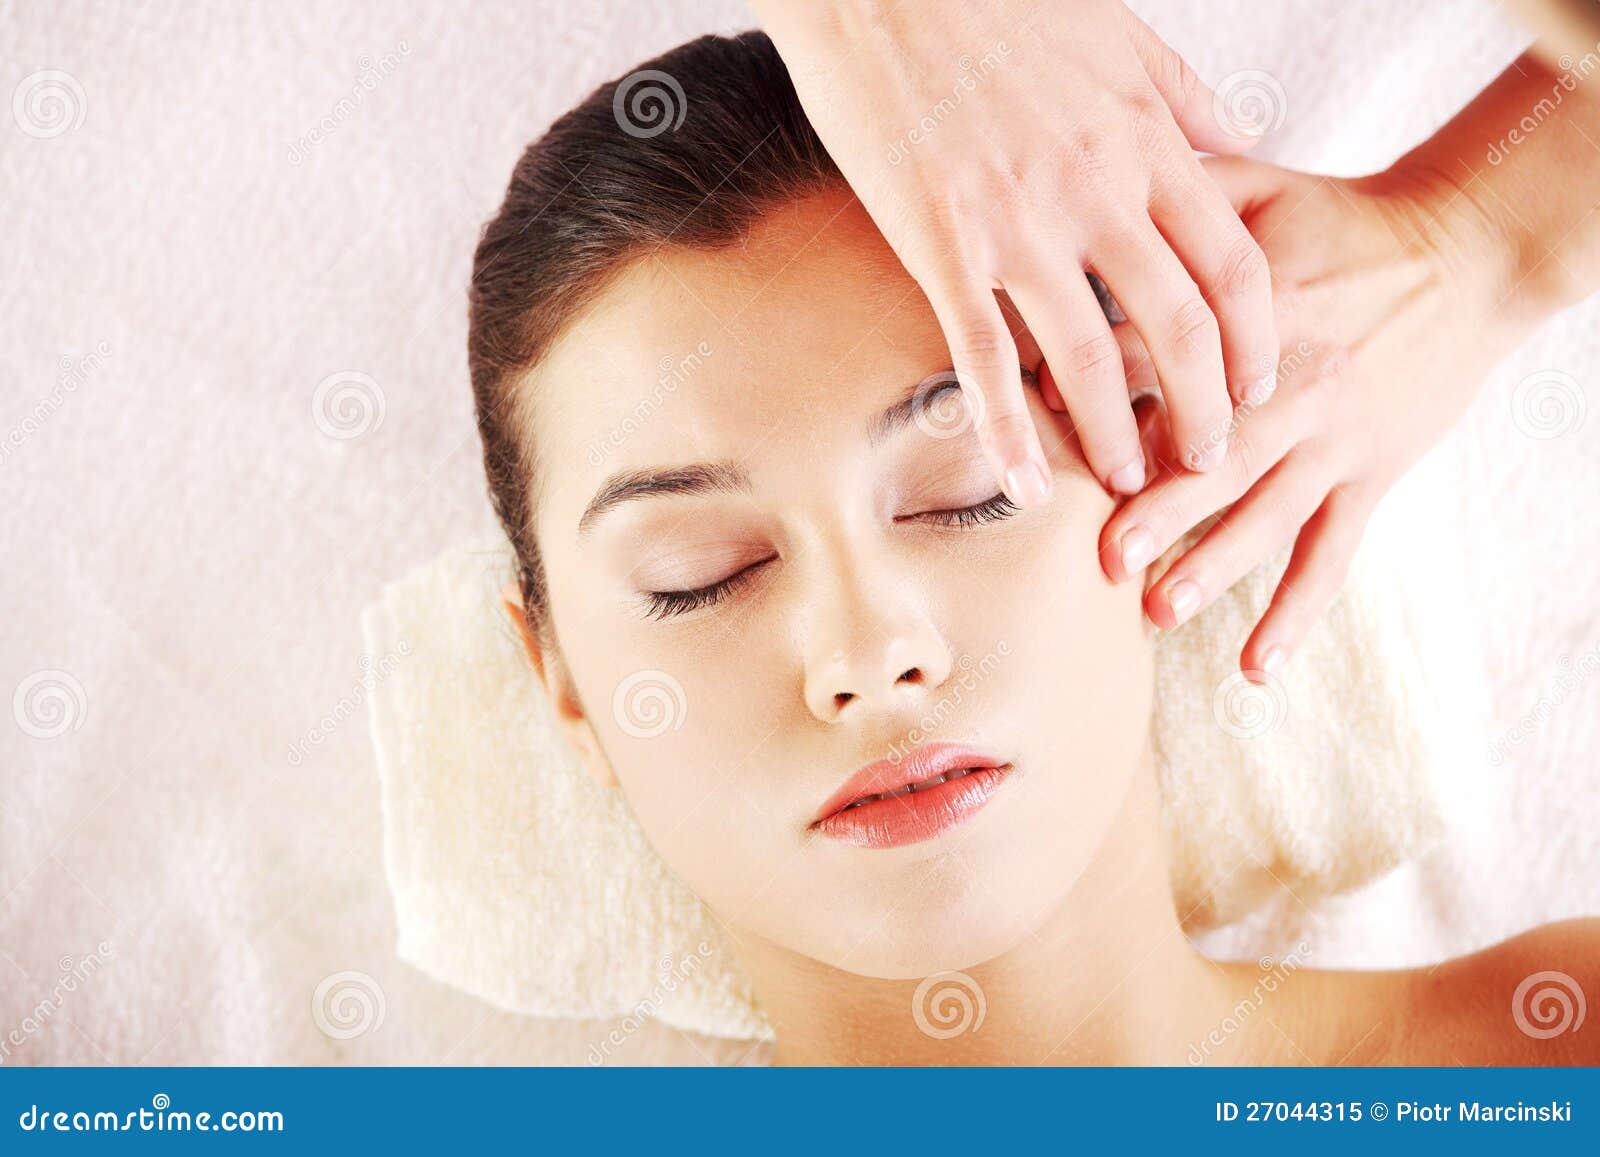 Relaxed Woman Enjoy Receiving Face Massage Stock Image Image Of